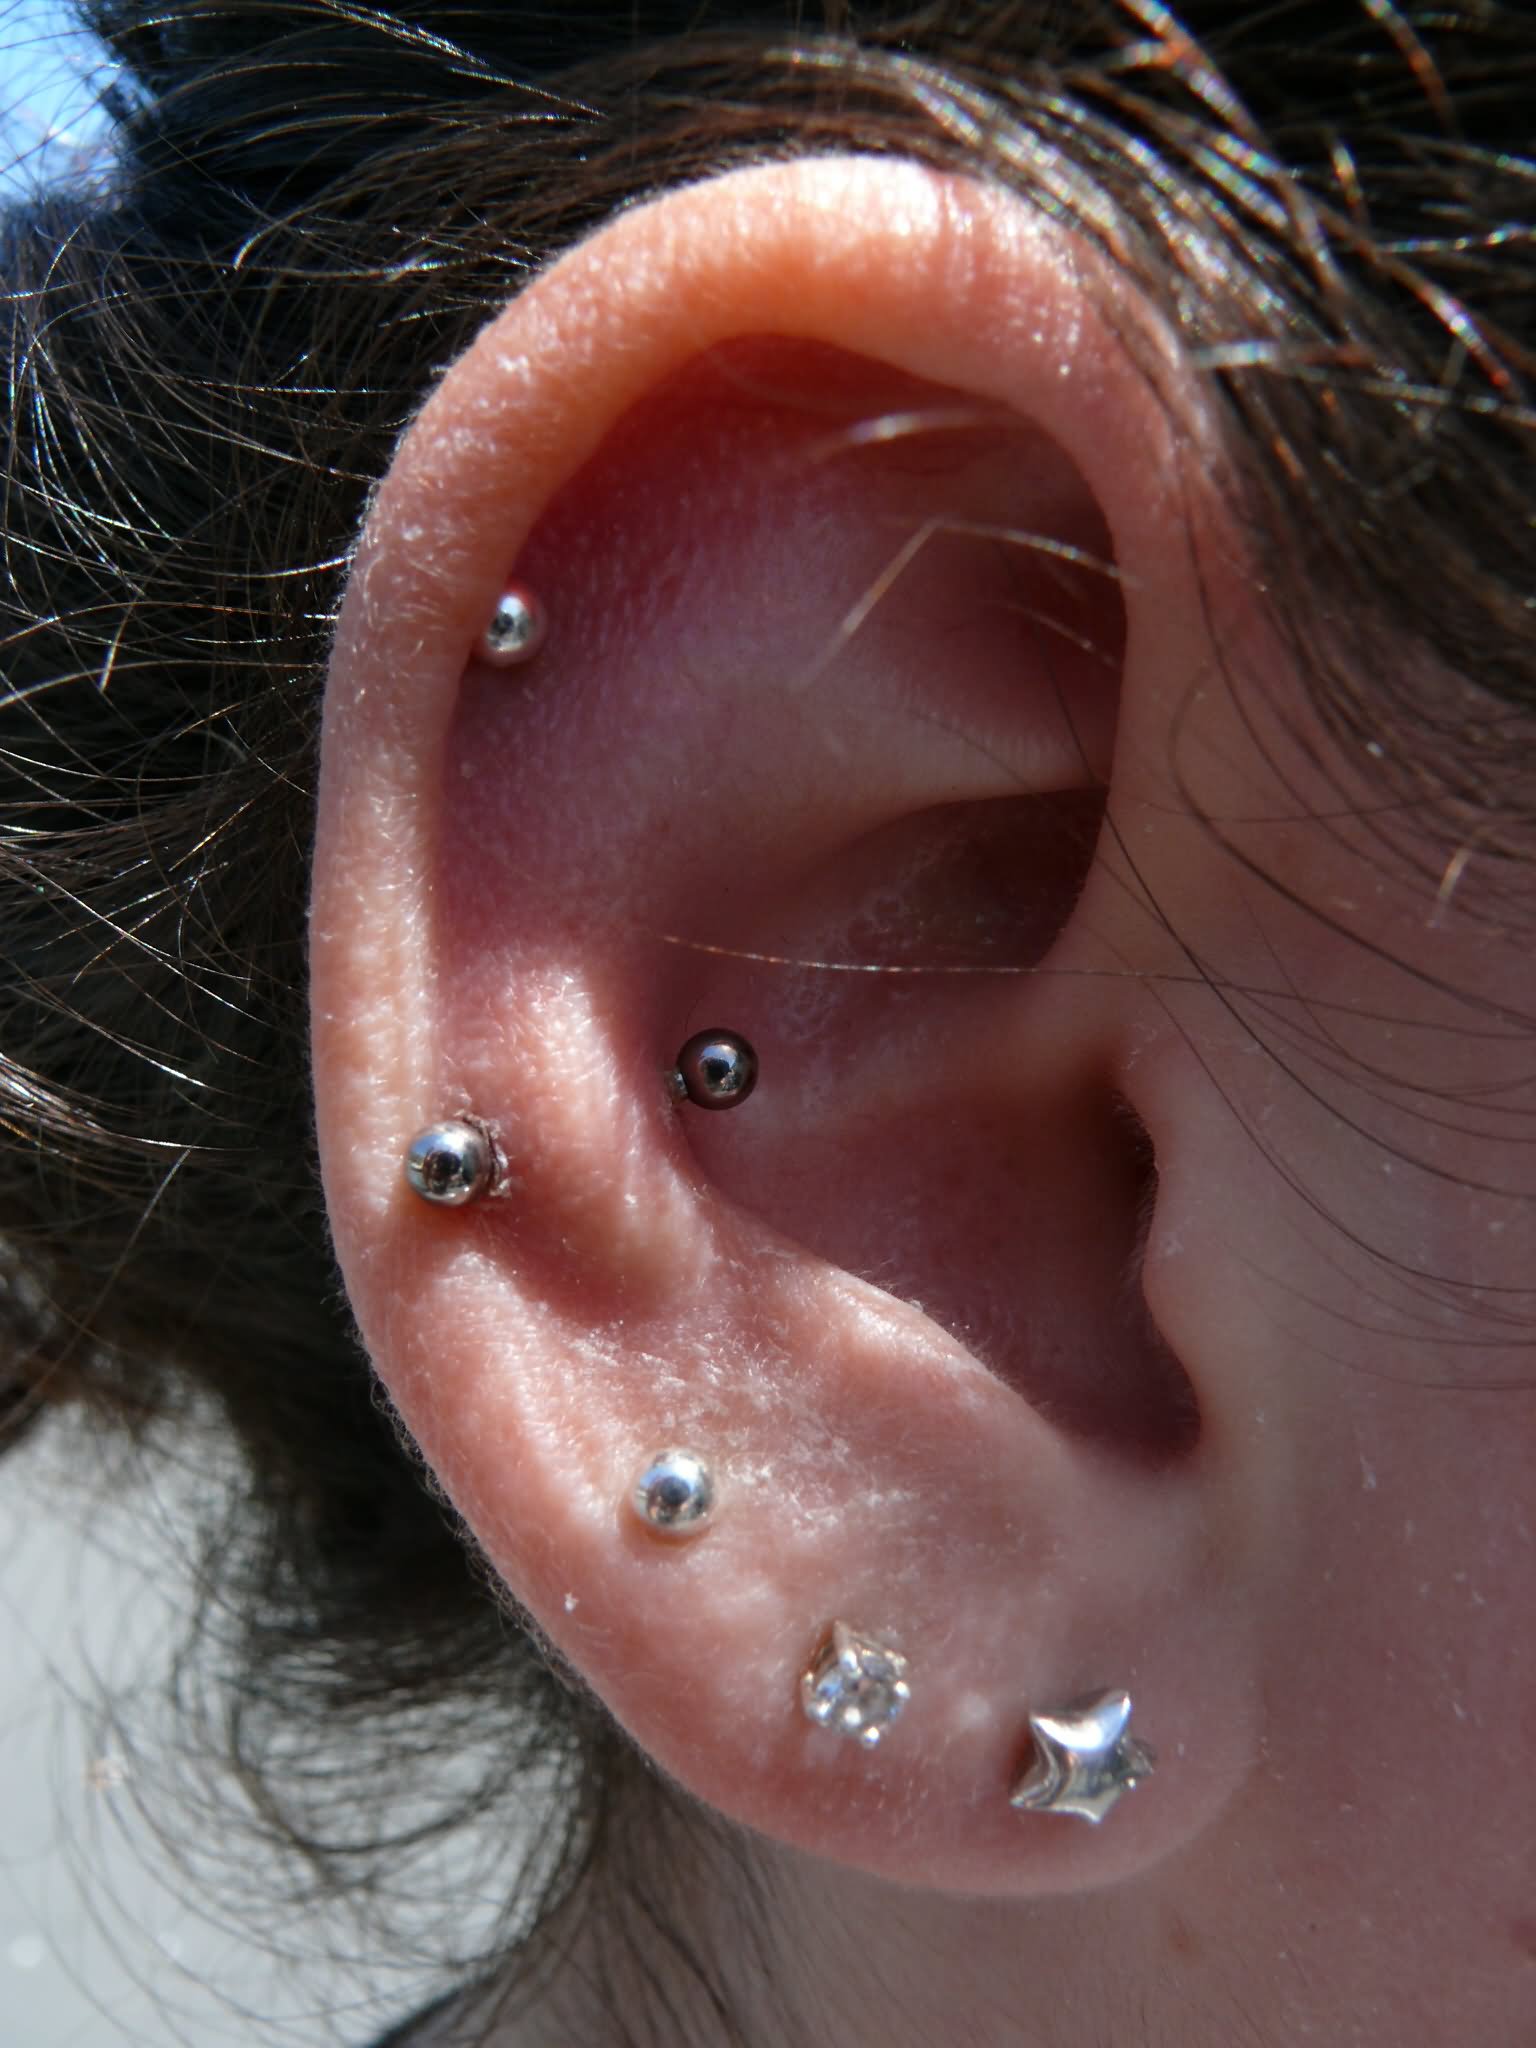 Amazing Triple Lobes And Curved Silver Barbell Snug Piercing